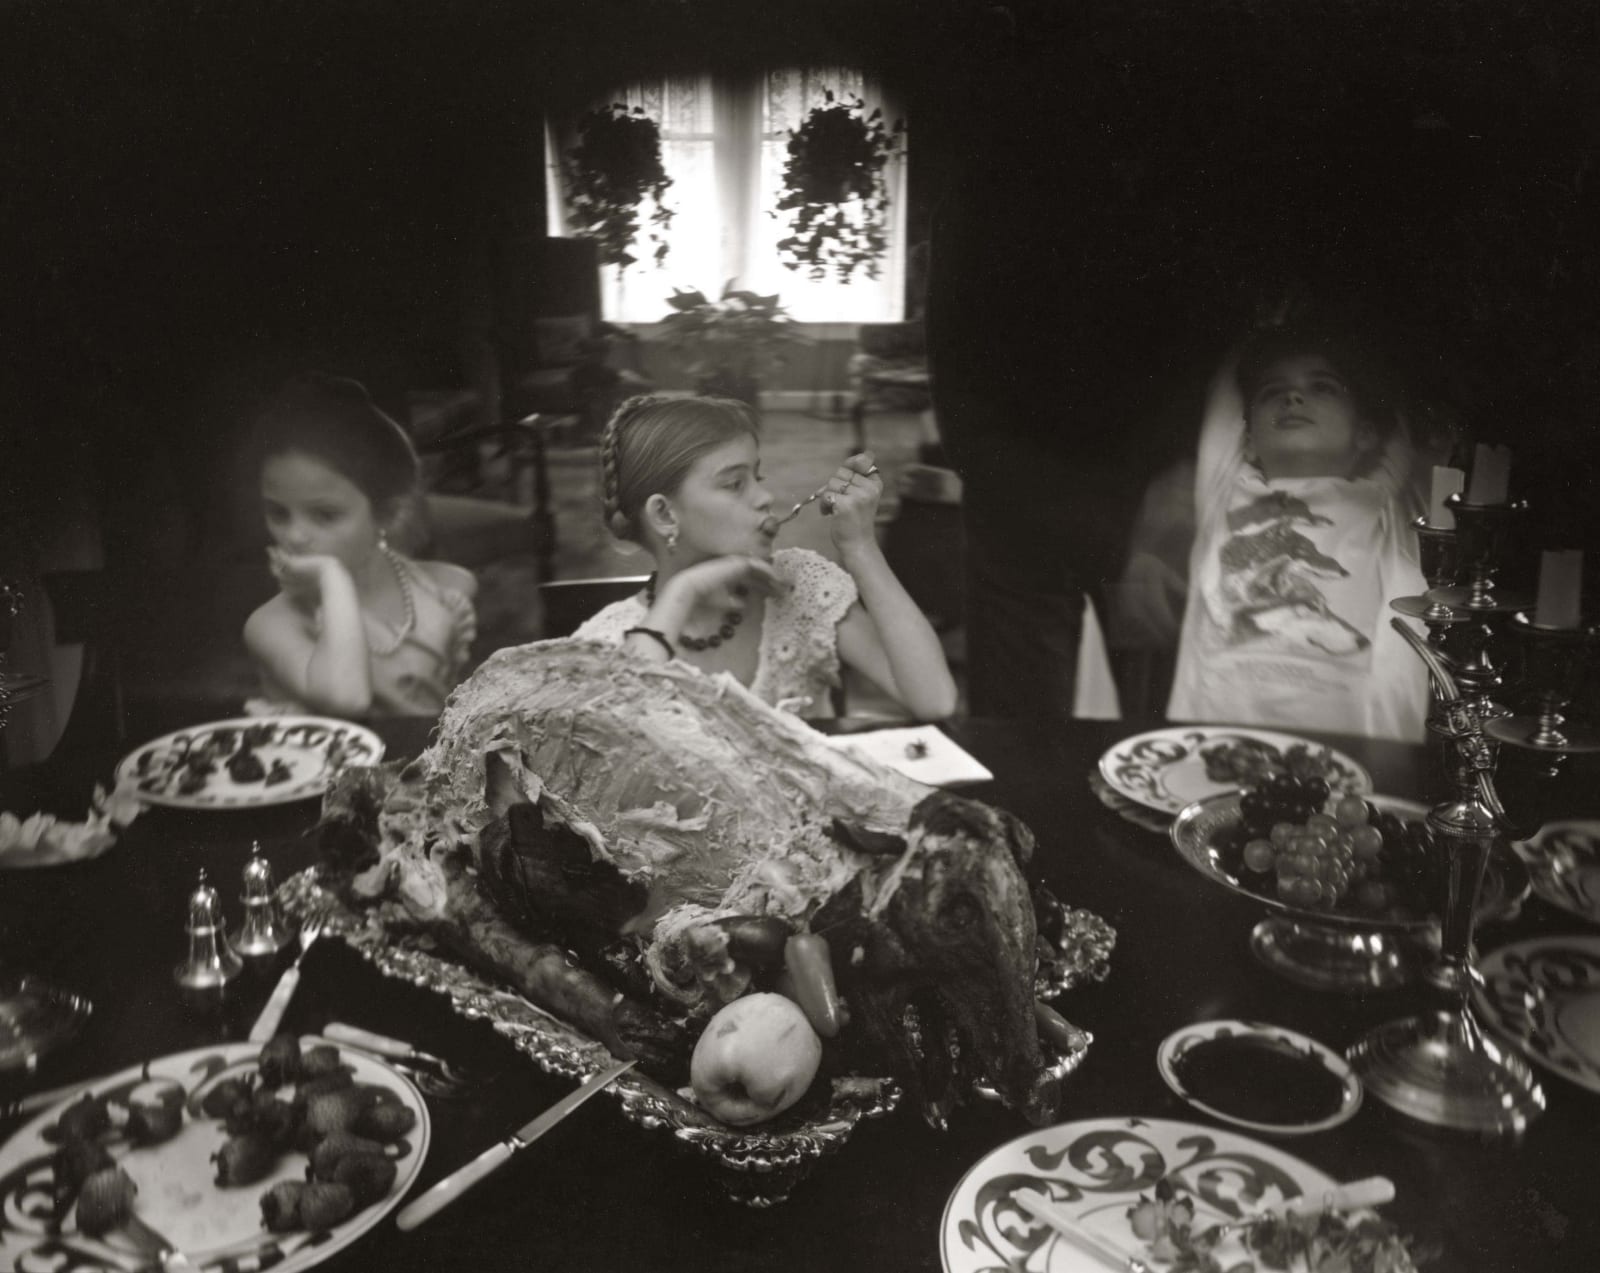 Jessie, Virginia and Emmett feasting on roast pig a la three wolves, from the Immediate Family series, by Sally Mann